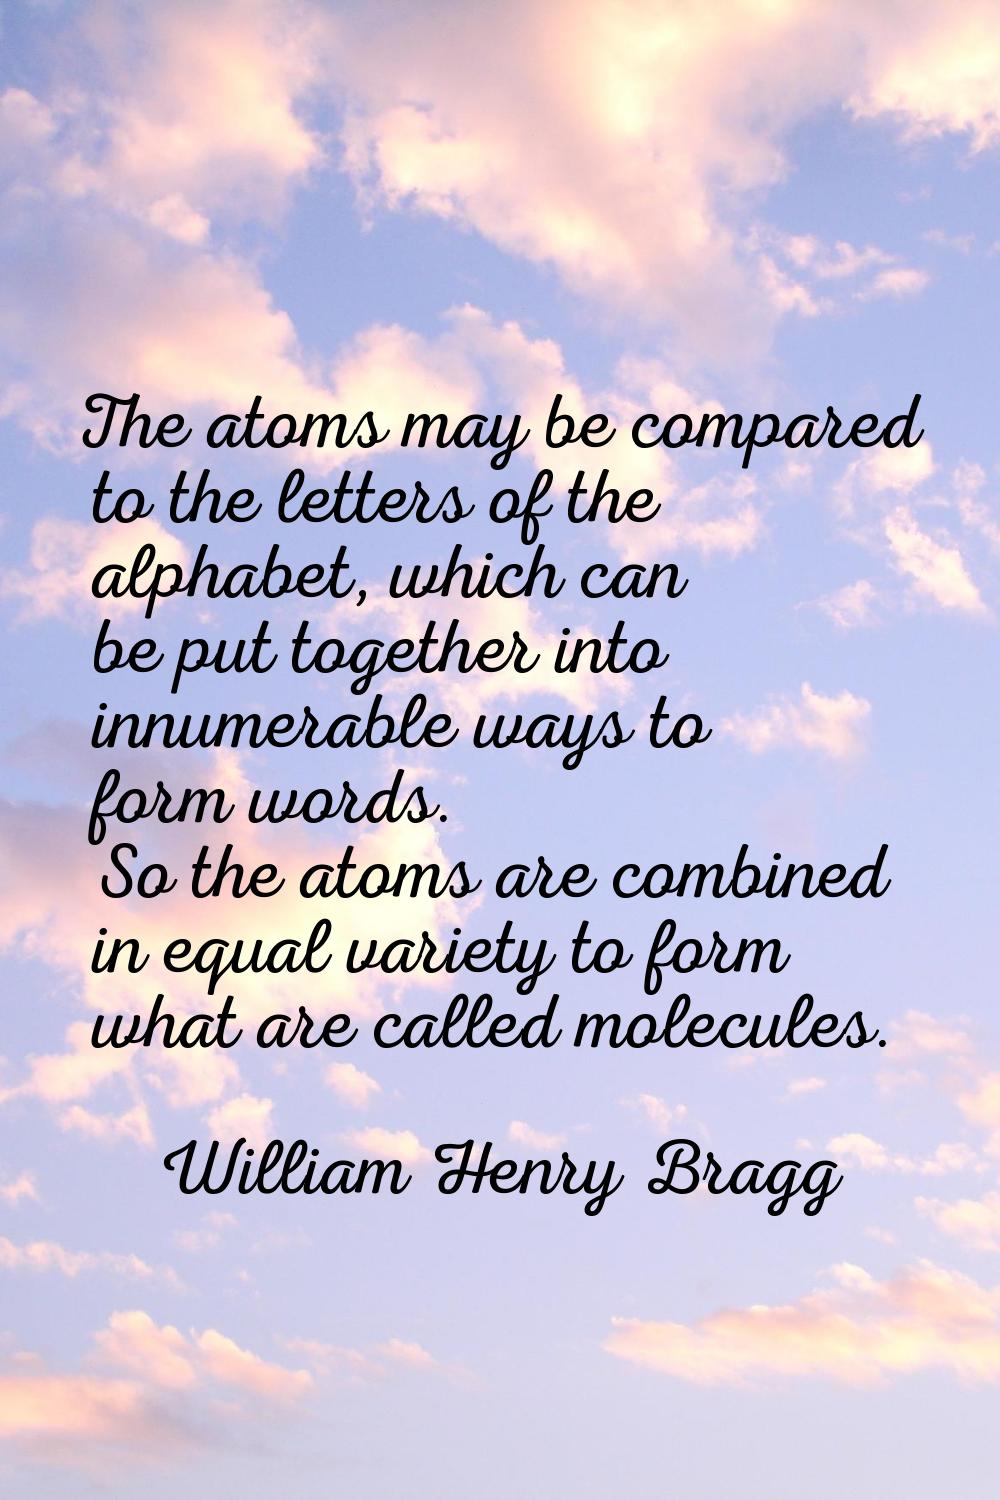 The atoms may be compared to the letters of the alphabet, which can be put together into innumerabl